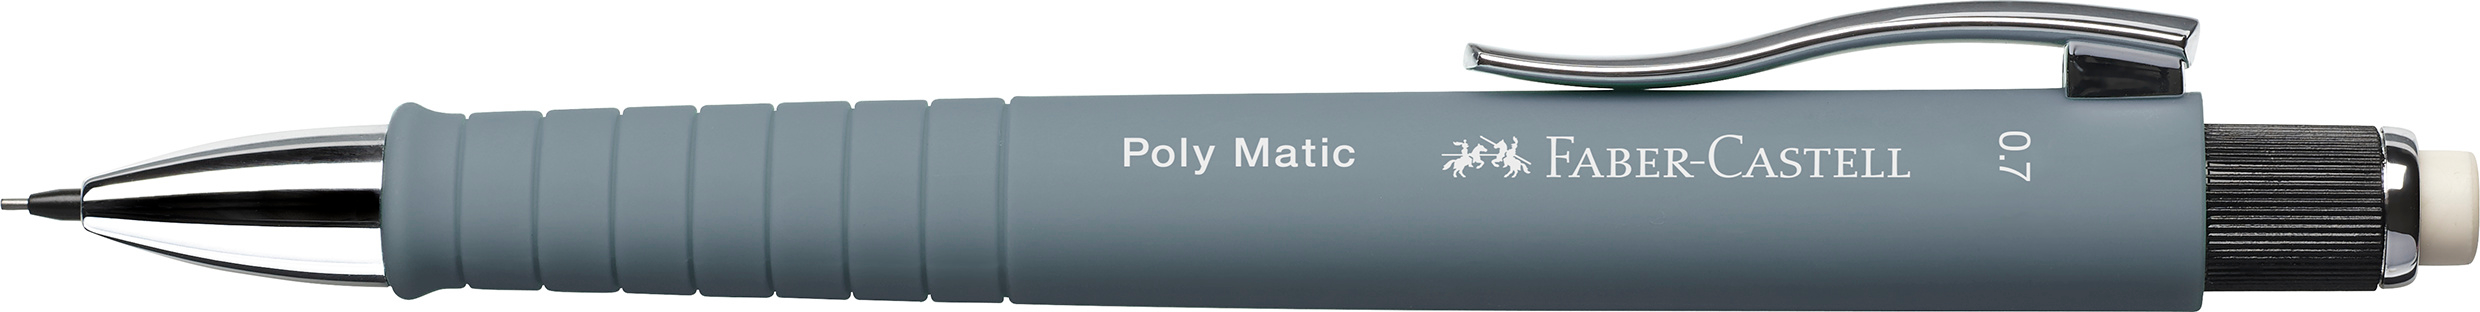 FABER-CASTELL Porte-mine Poly Matic 0.7mm 133388 gris